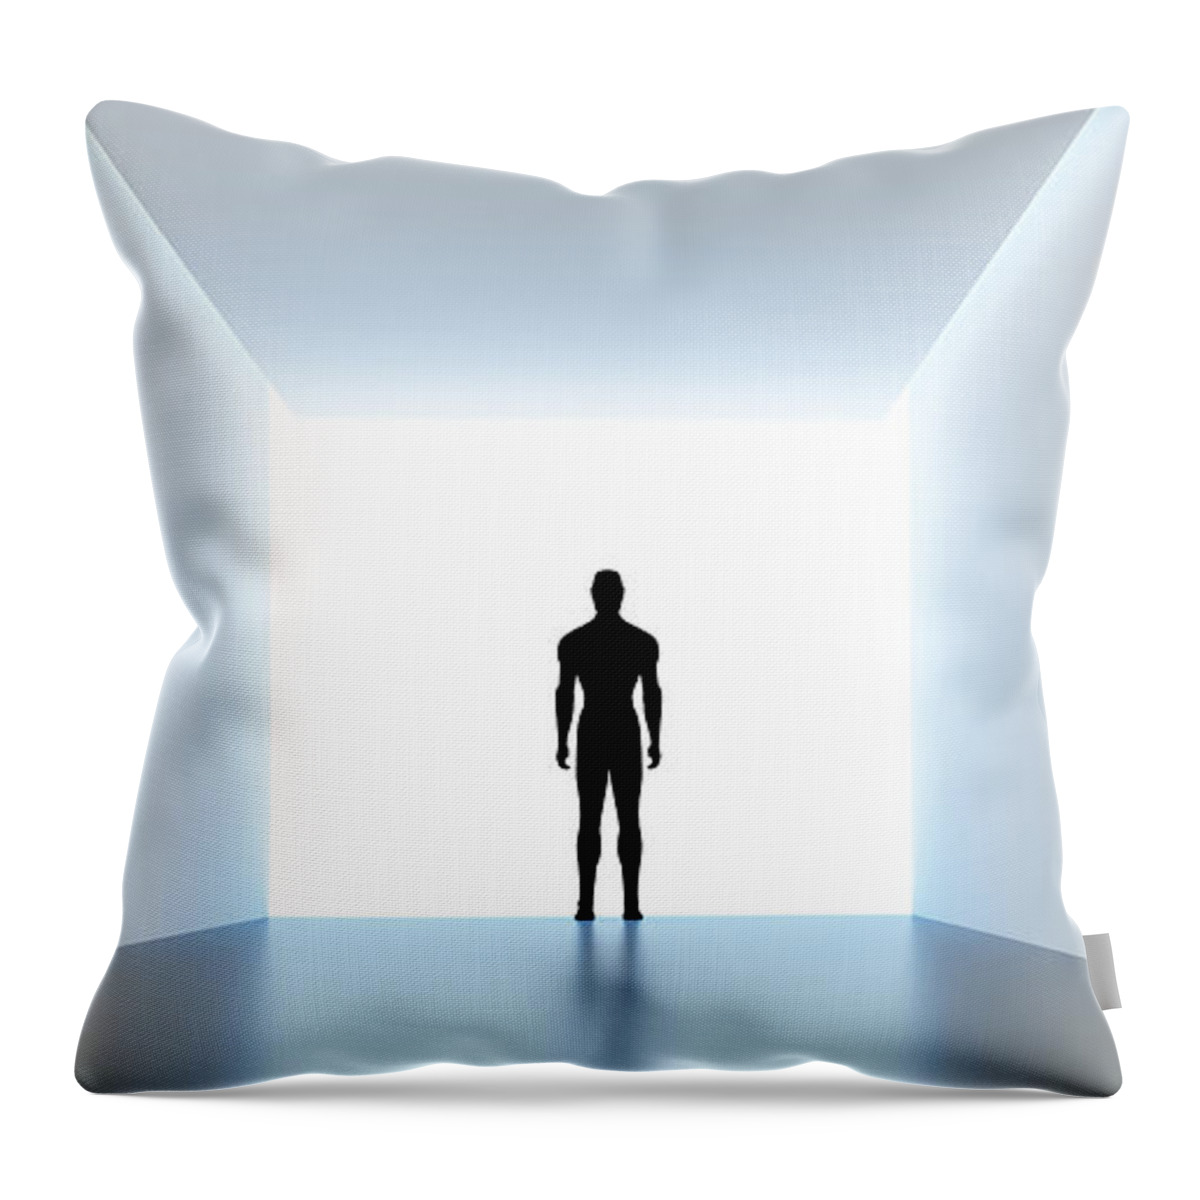 The End Throw Pillow featuring the photograph Exit by Enot-poloskun